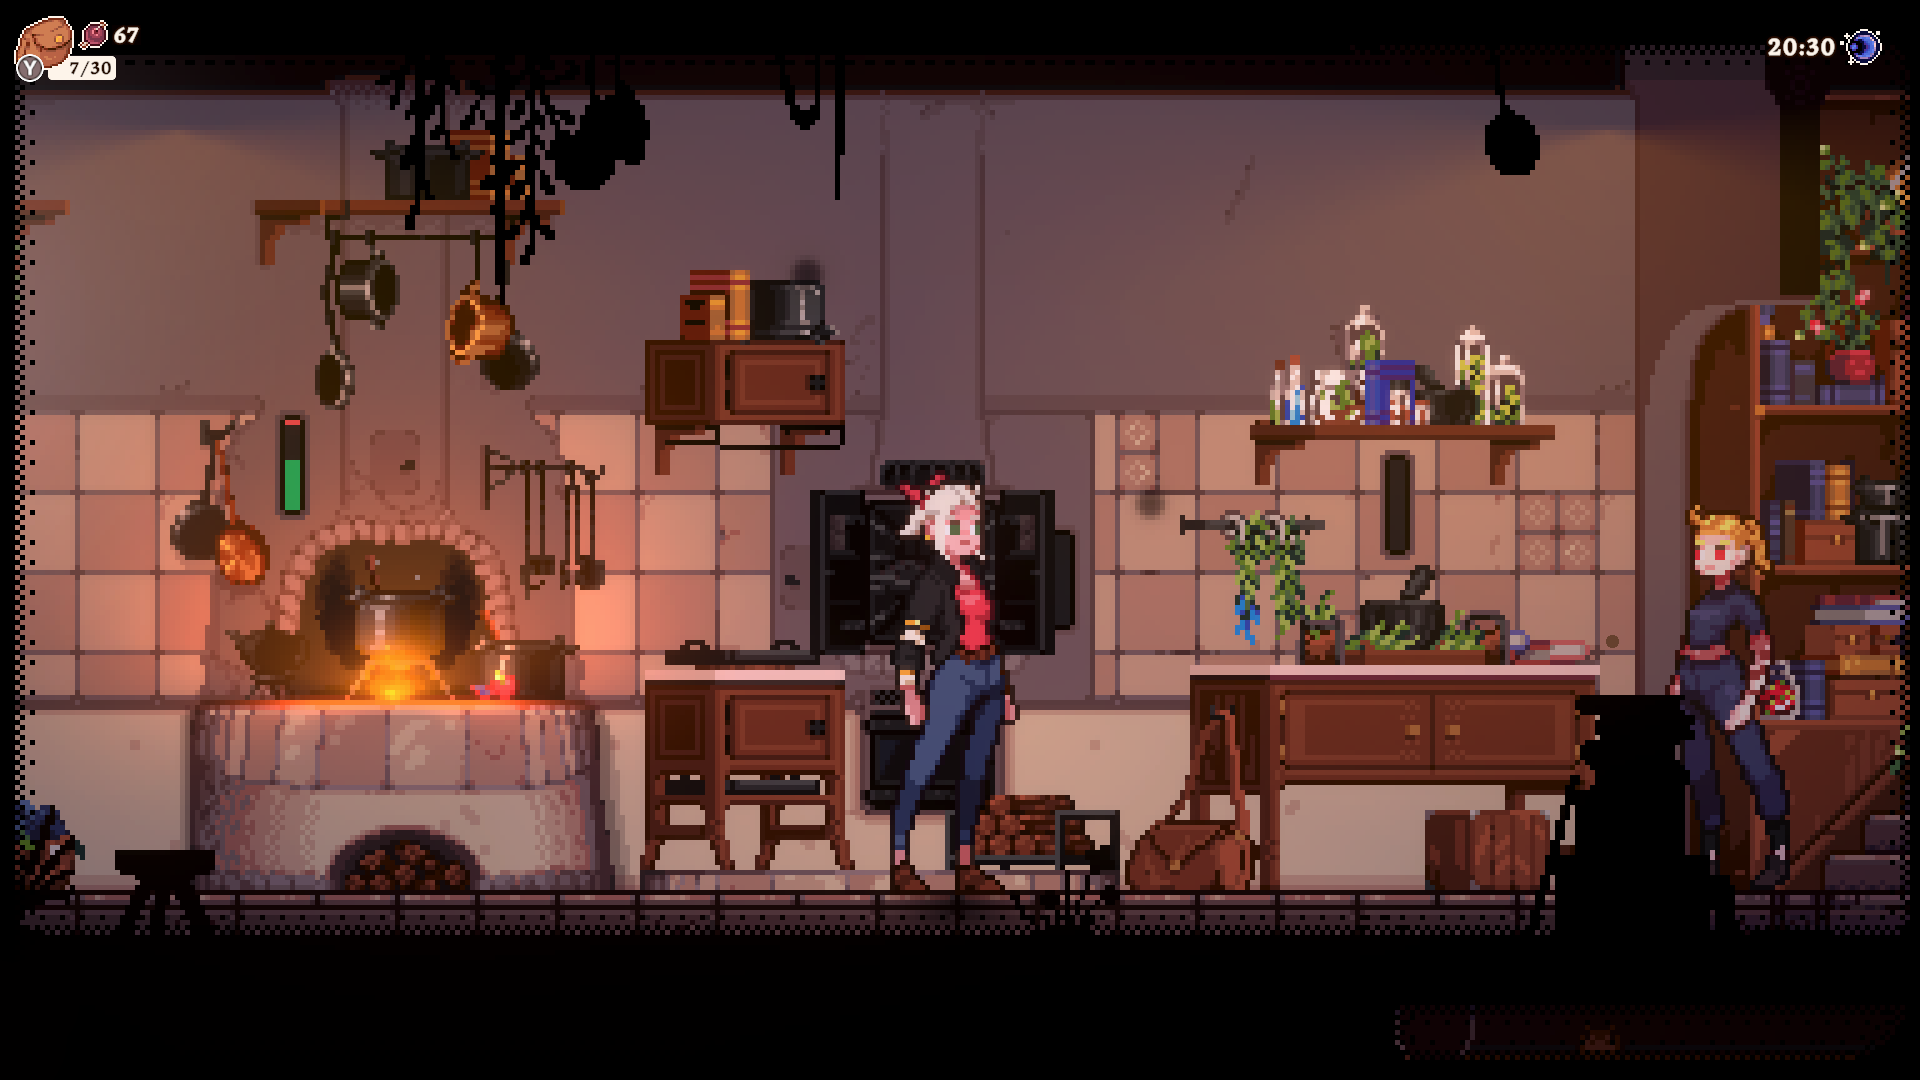 Gameplay Screenshot of Flora inside her kitchen with an active cooking pot cooking on the stove pot.